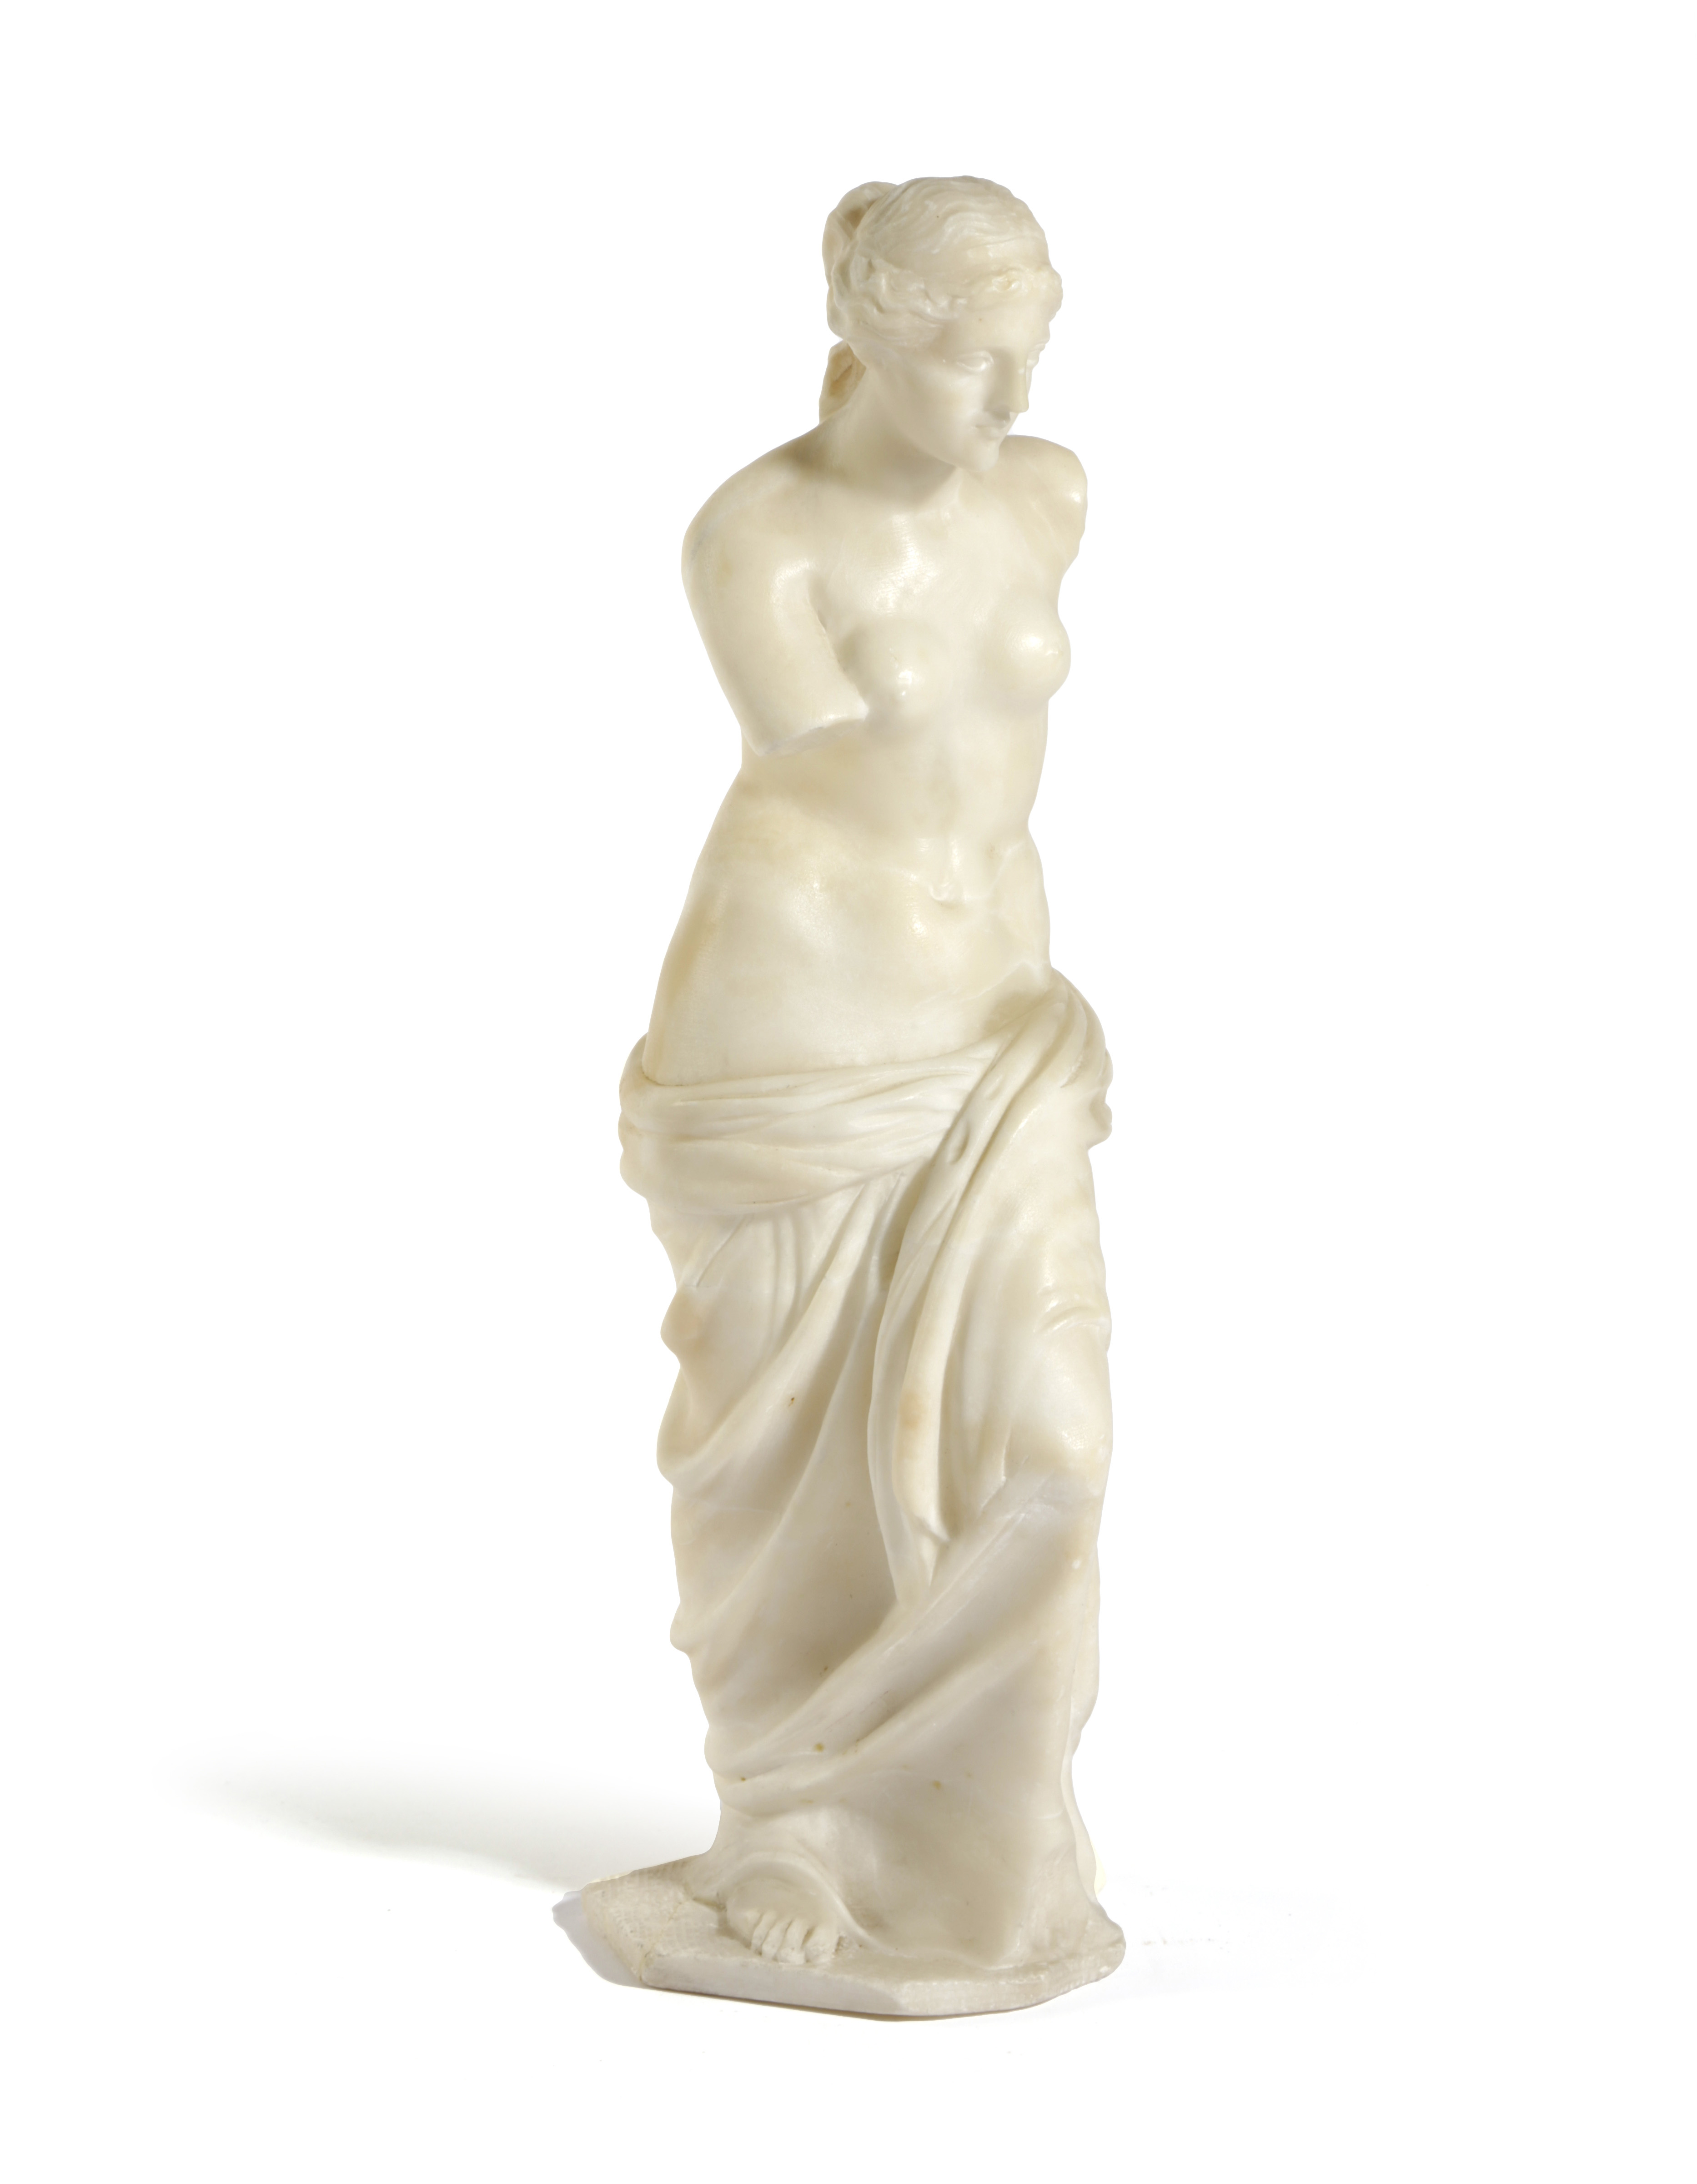 A FRENCH ALABASTER GRAND TOUR FIGURE OF THE VENUS DE MILO LATE 19TH / EARLY 20TH CENTURY 34cm high